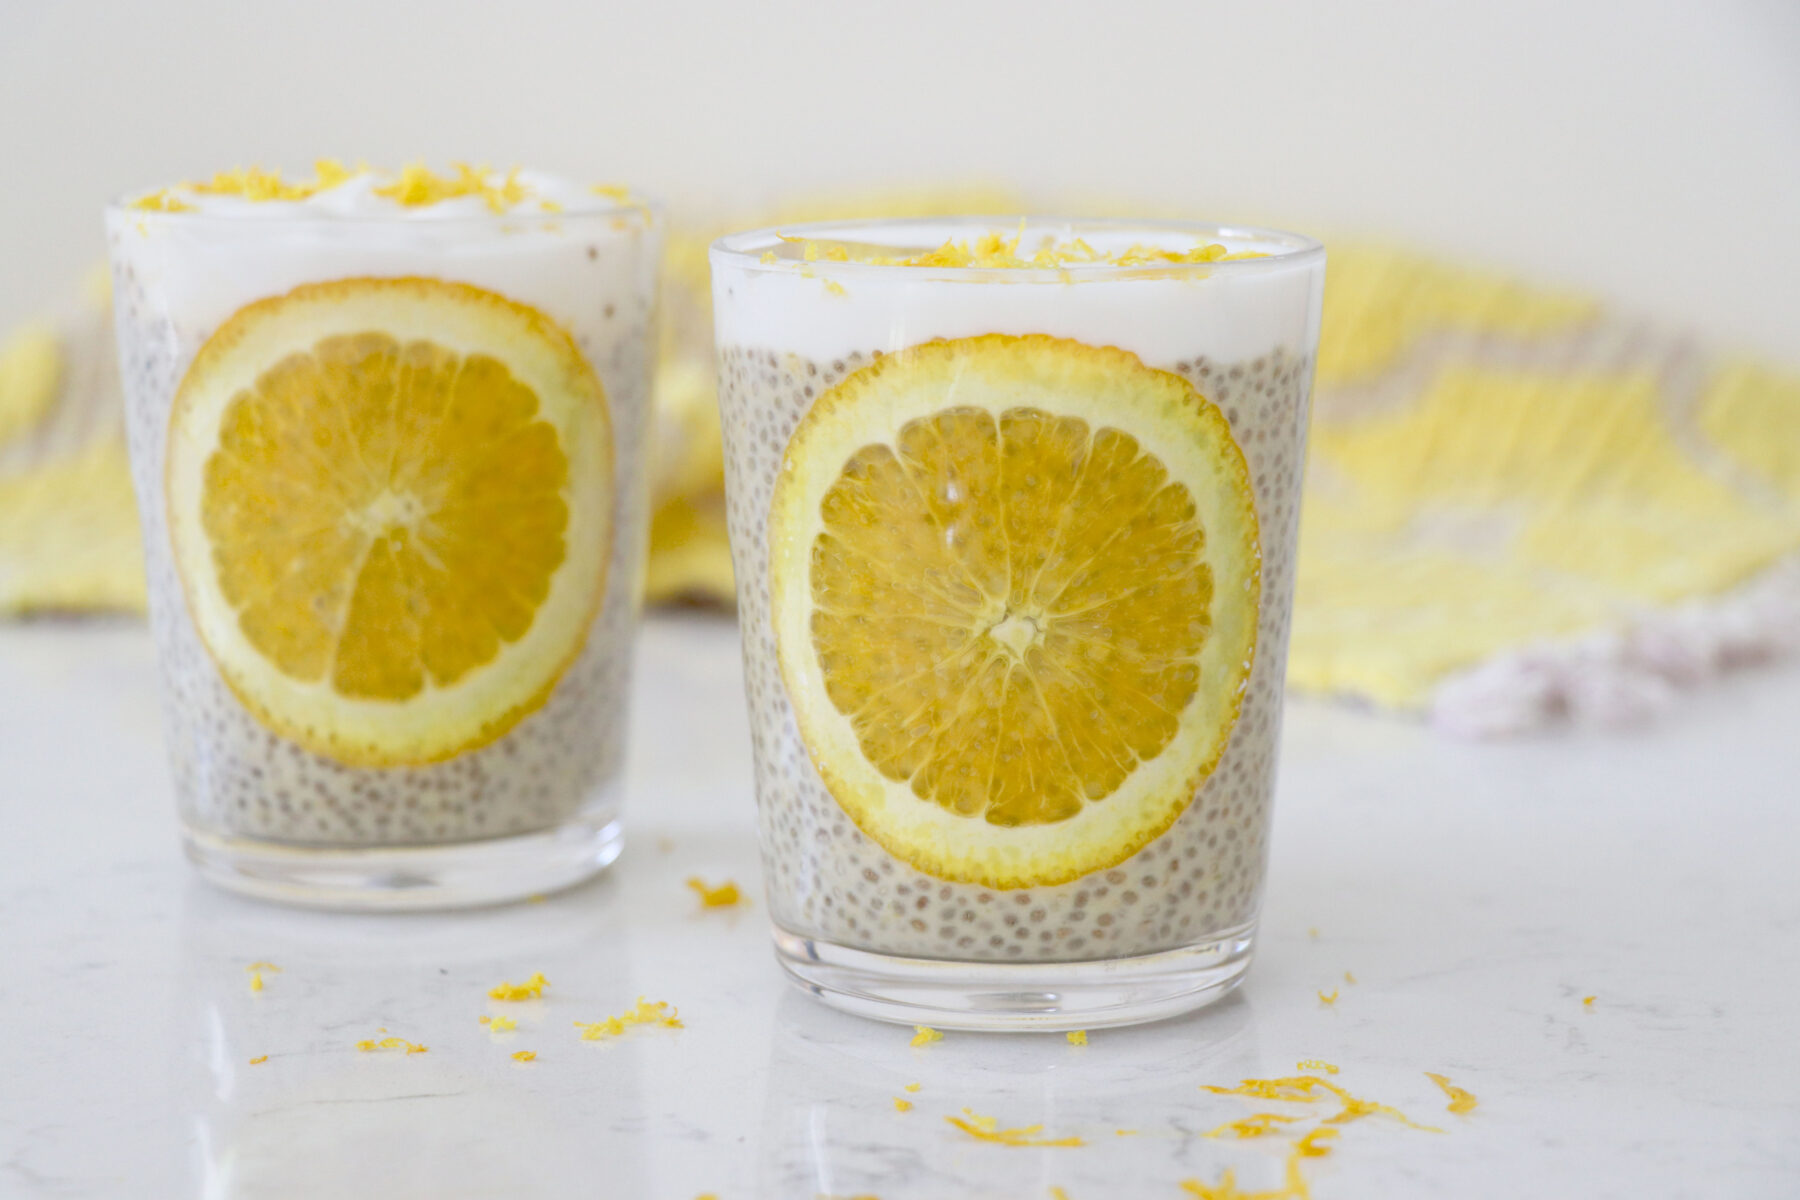 Two glass jars of chia pudding with lemon slices on the side.